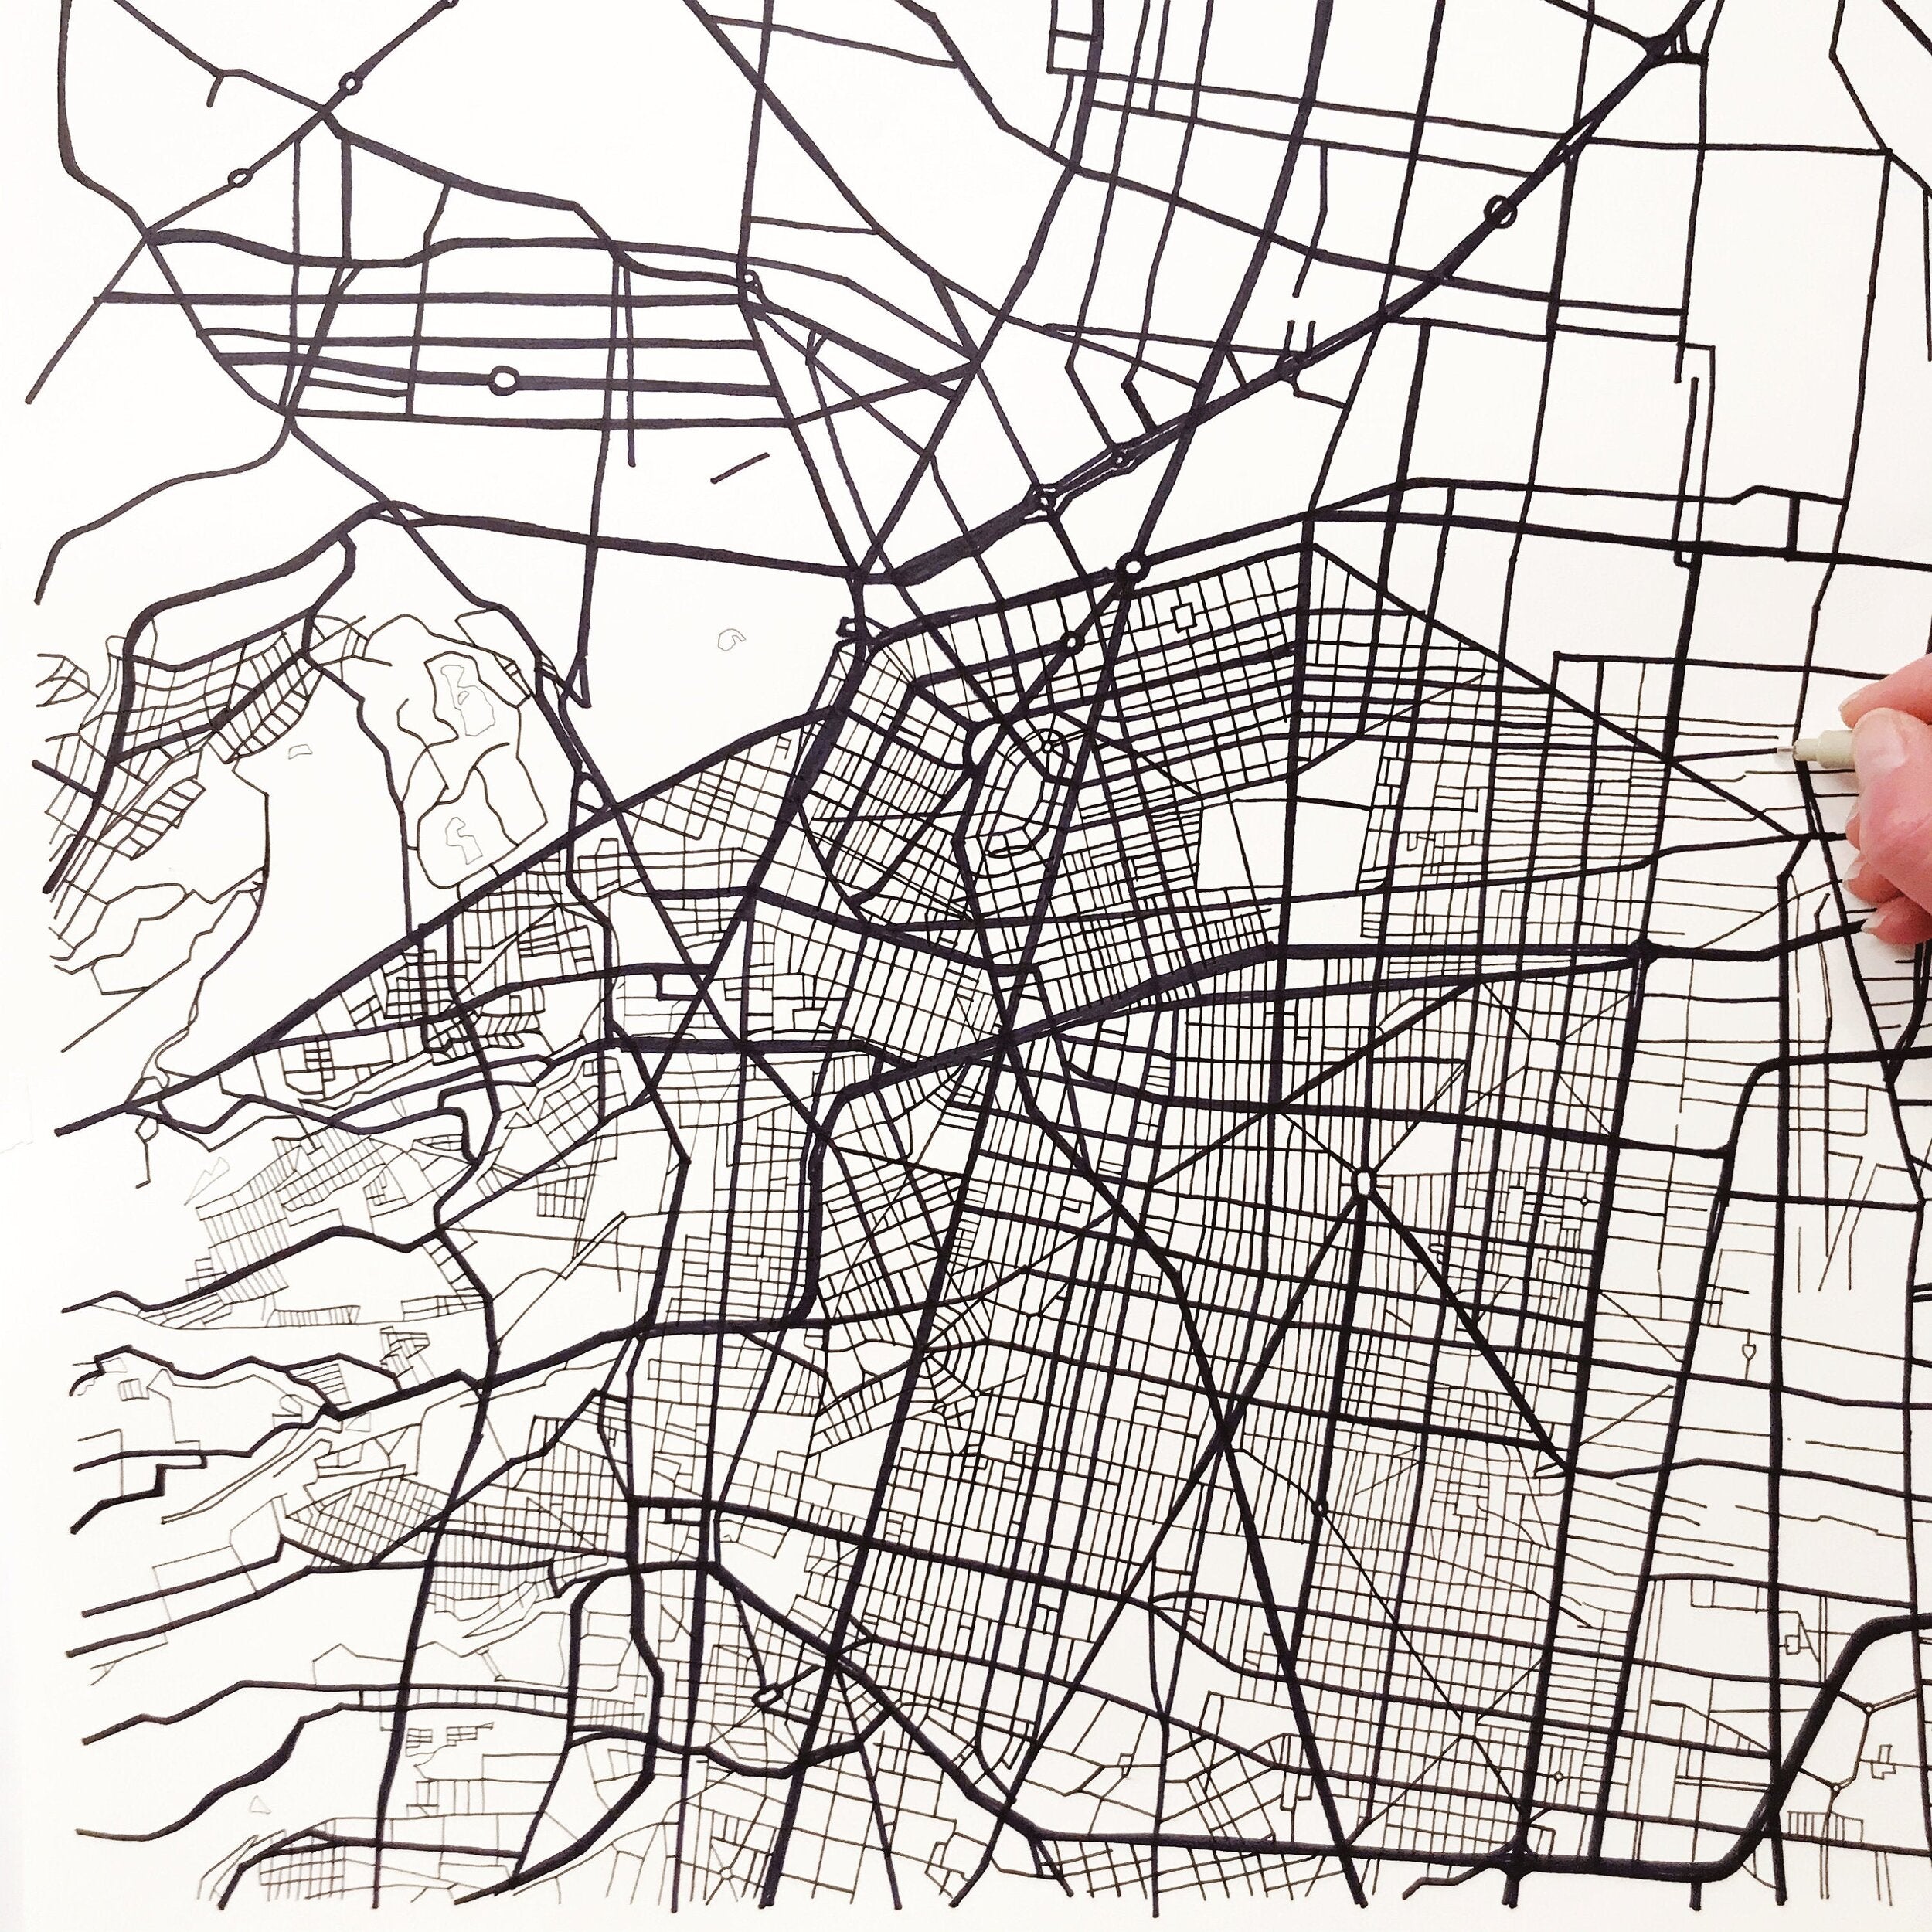 MEXICO CITY City Line Map Drawing: PRINT